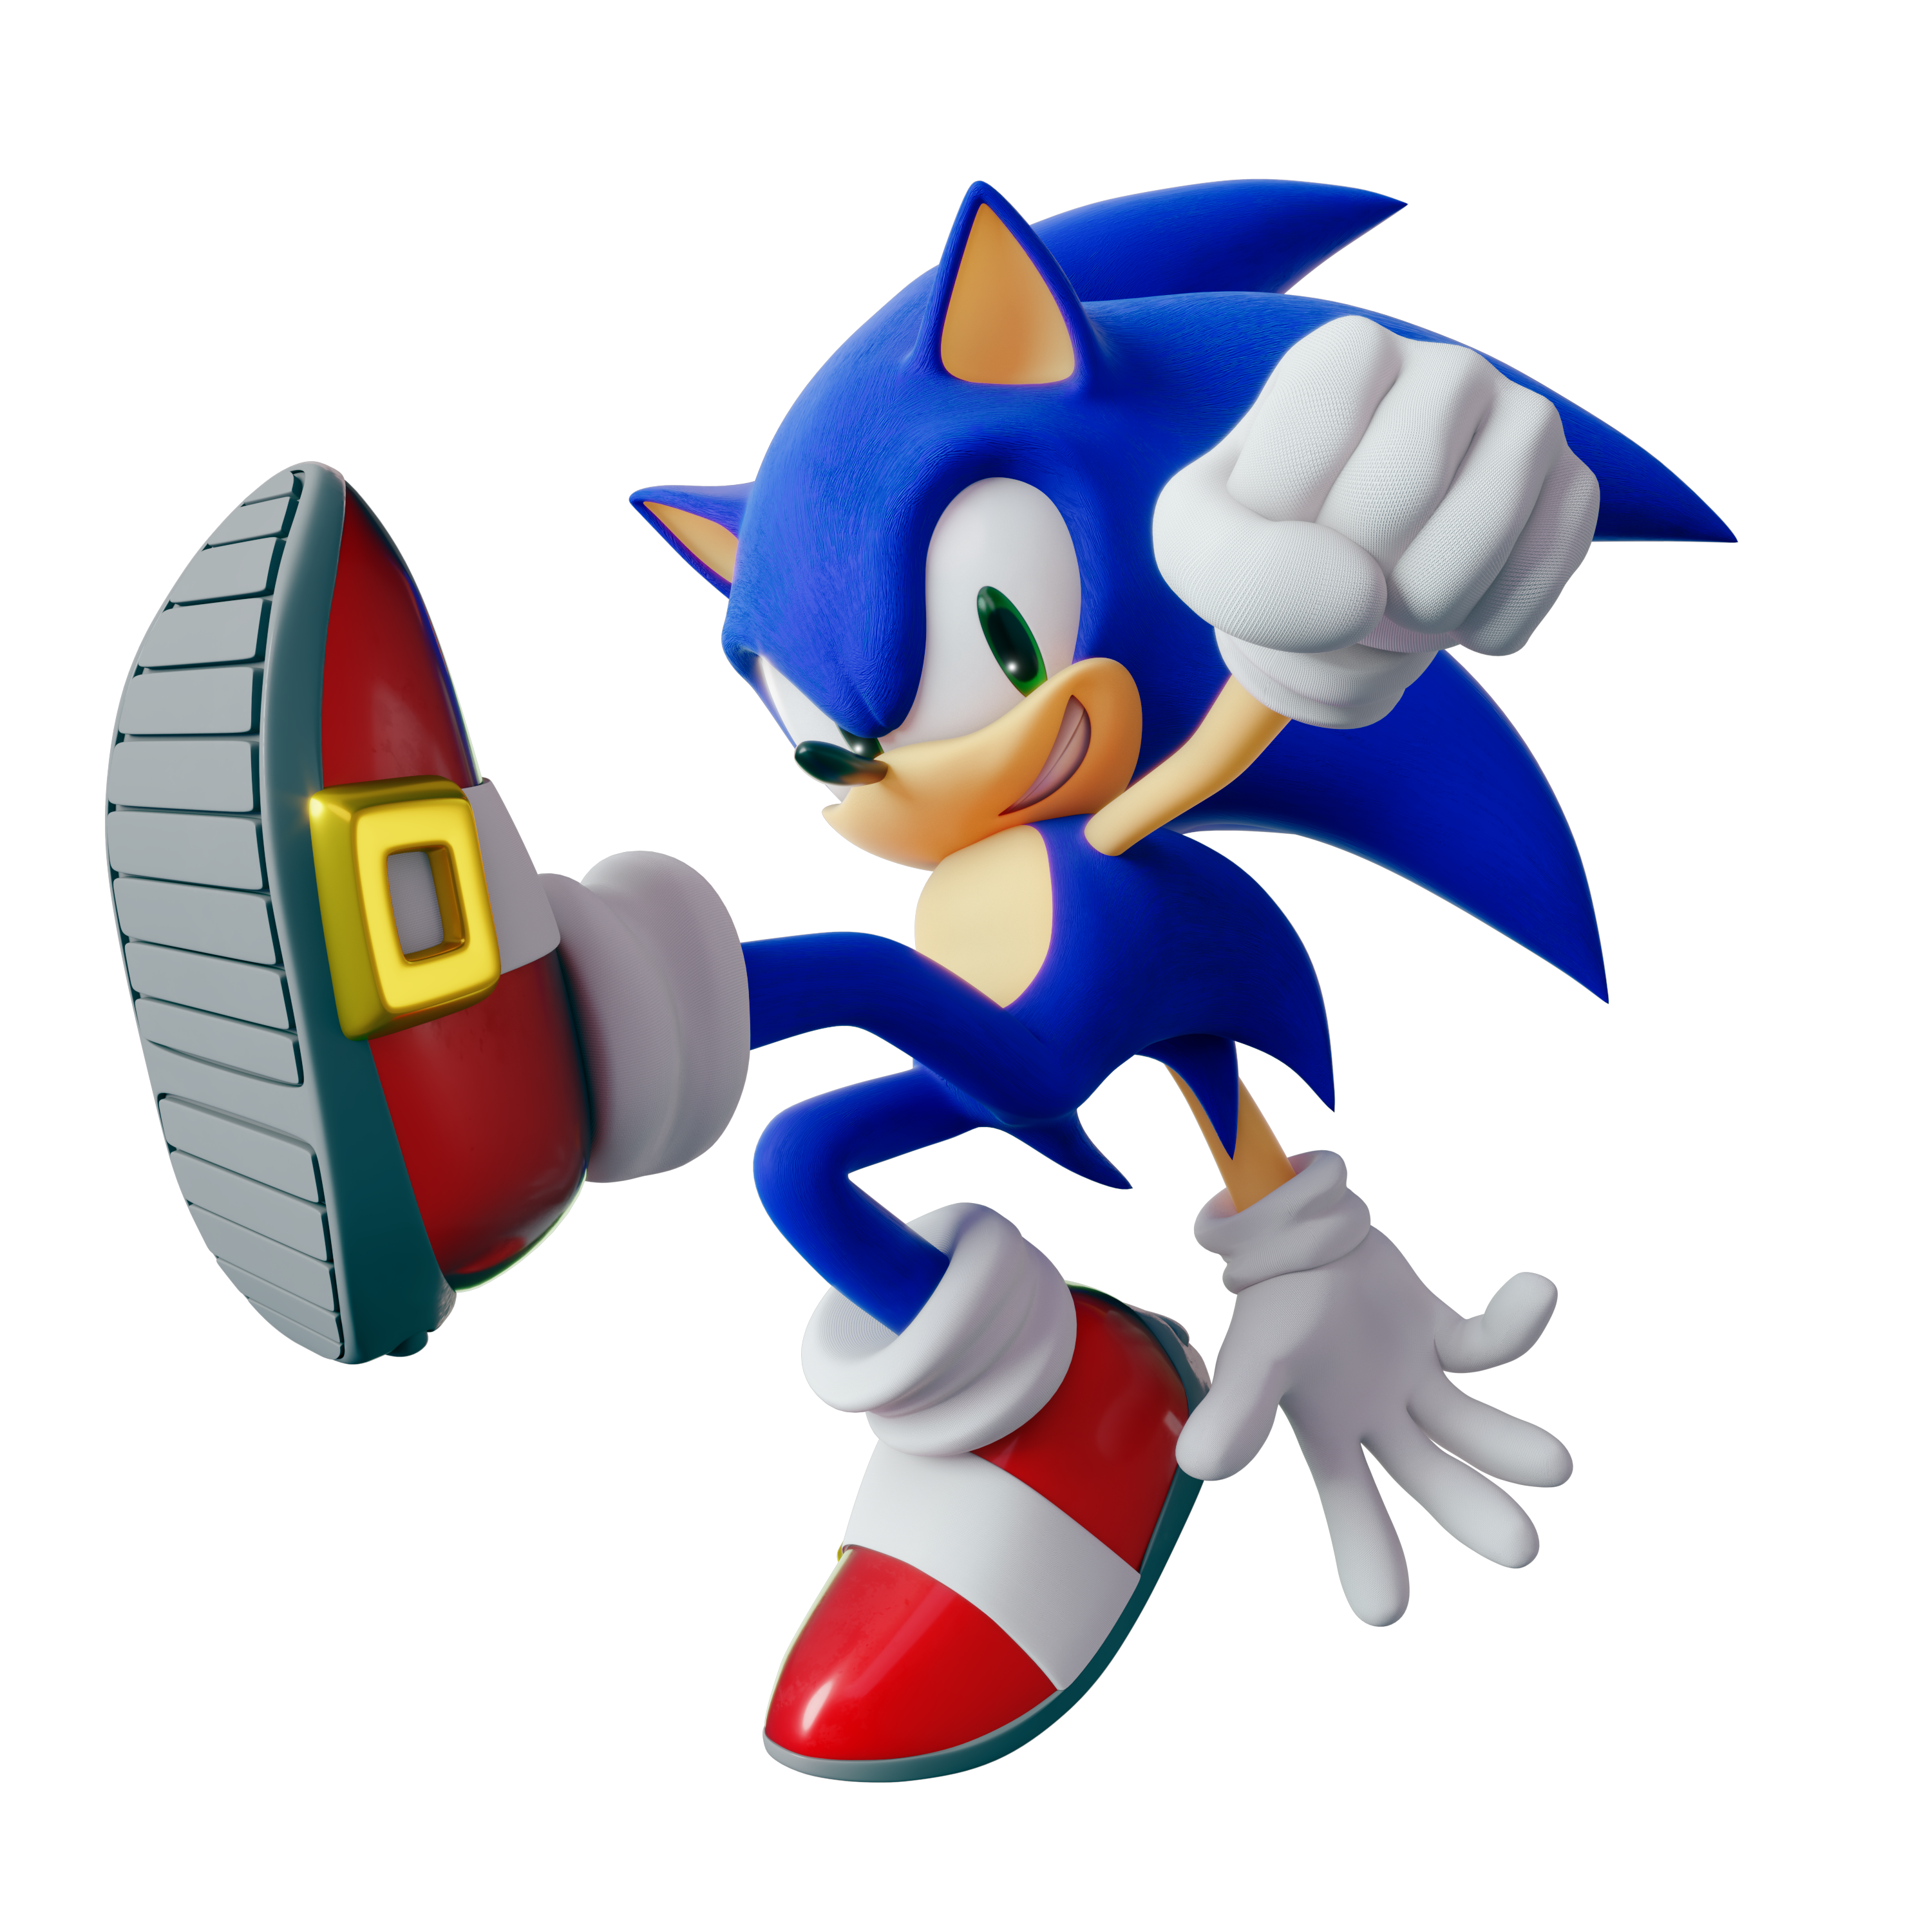 TBSF on X: Hey I made a render of that one Sonic Channel art with